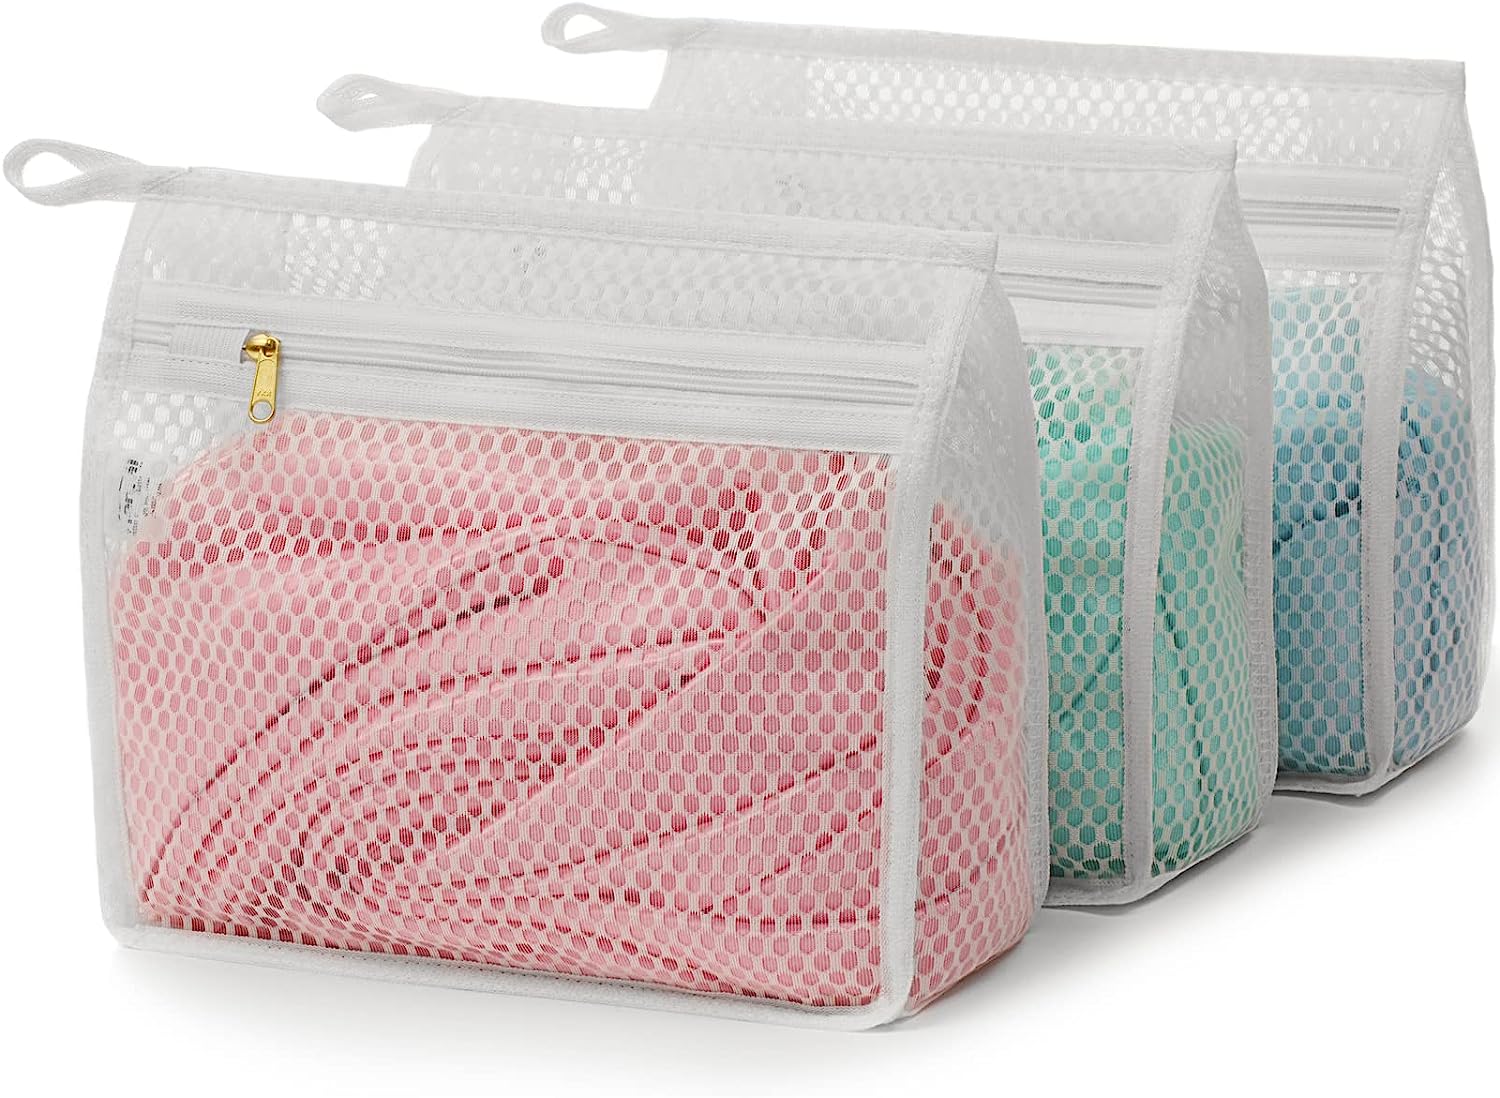 Lingerie Bags for Washing Delicates,Small Fine Mesh Laundry Bags,3Pcs(1  Large,1 Medium,1 Small)